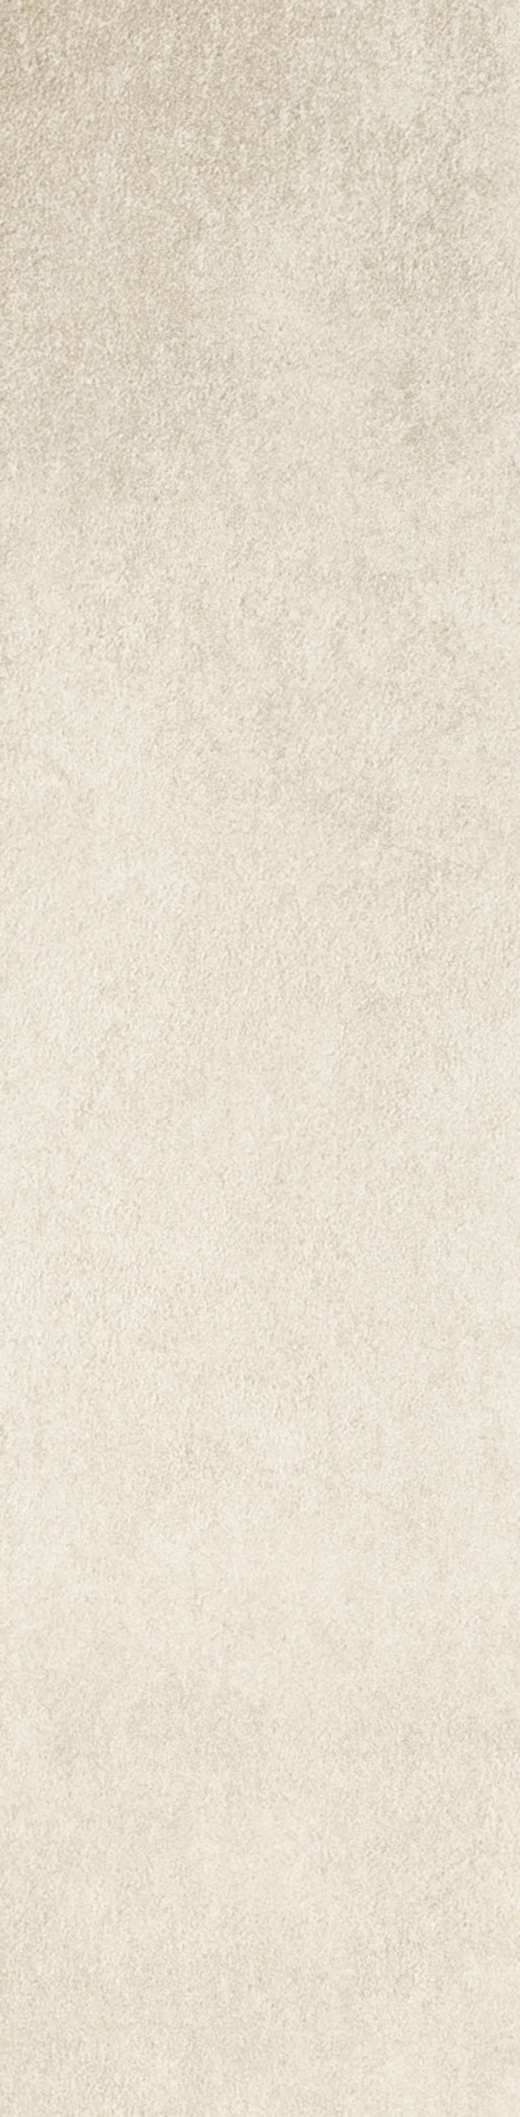 Industry Ivory Soft 8"x32 | Through Body Porcelain | Floor/Wall Tile